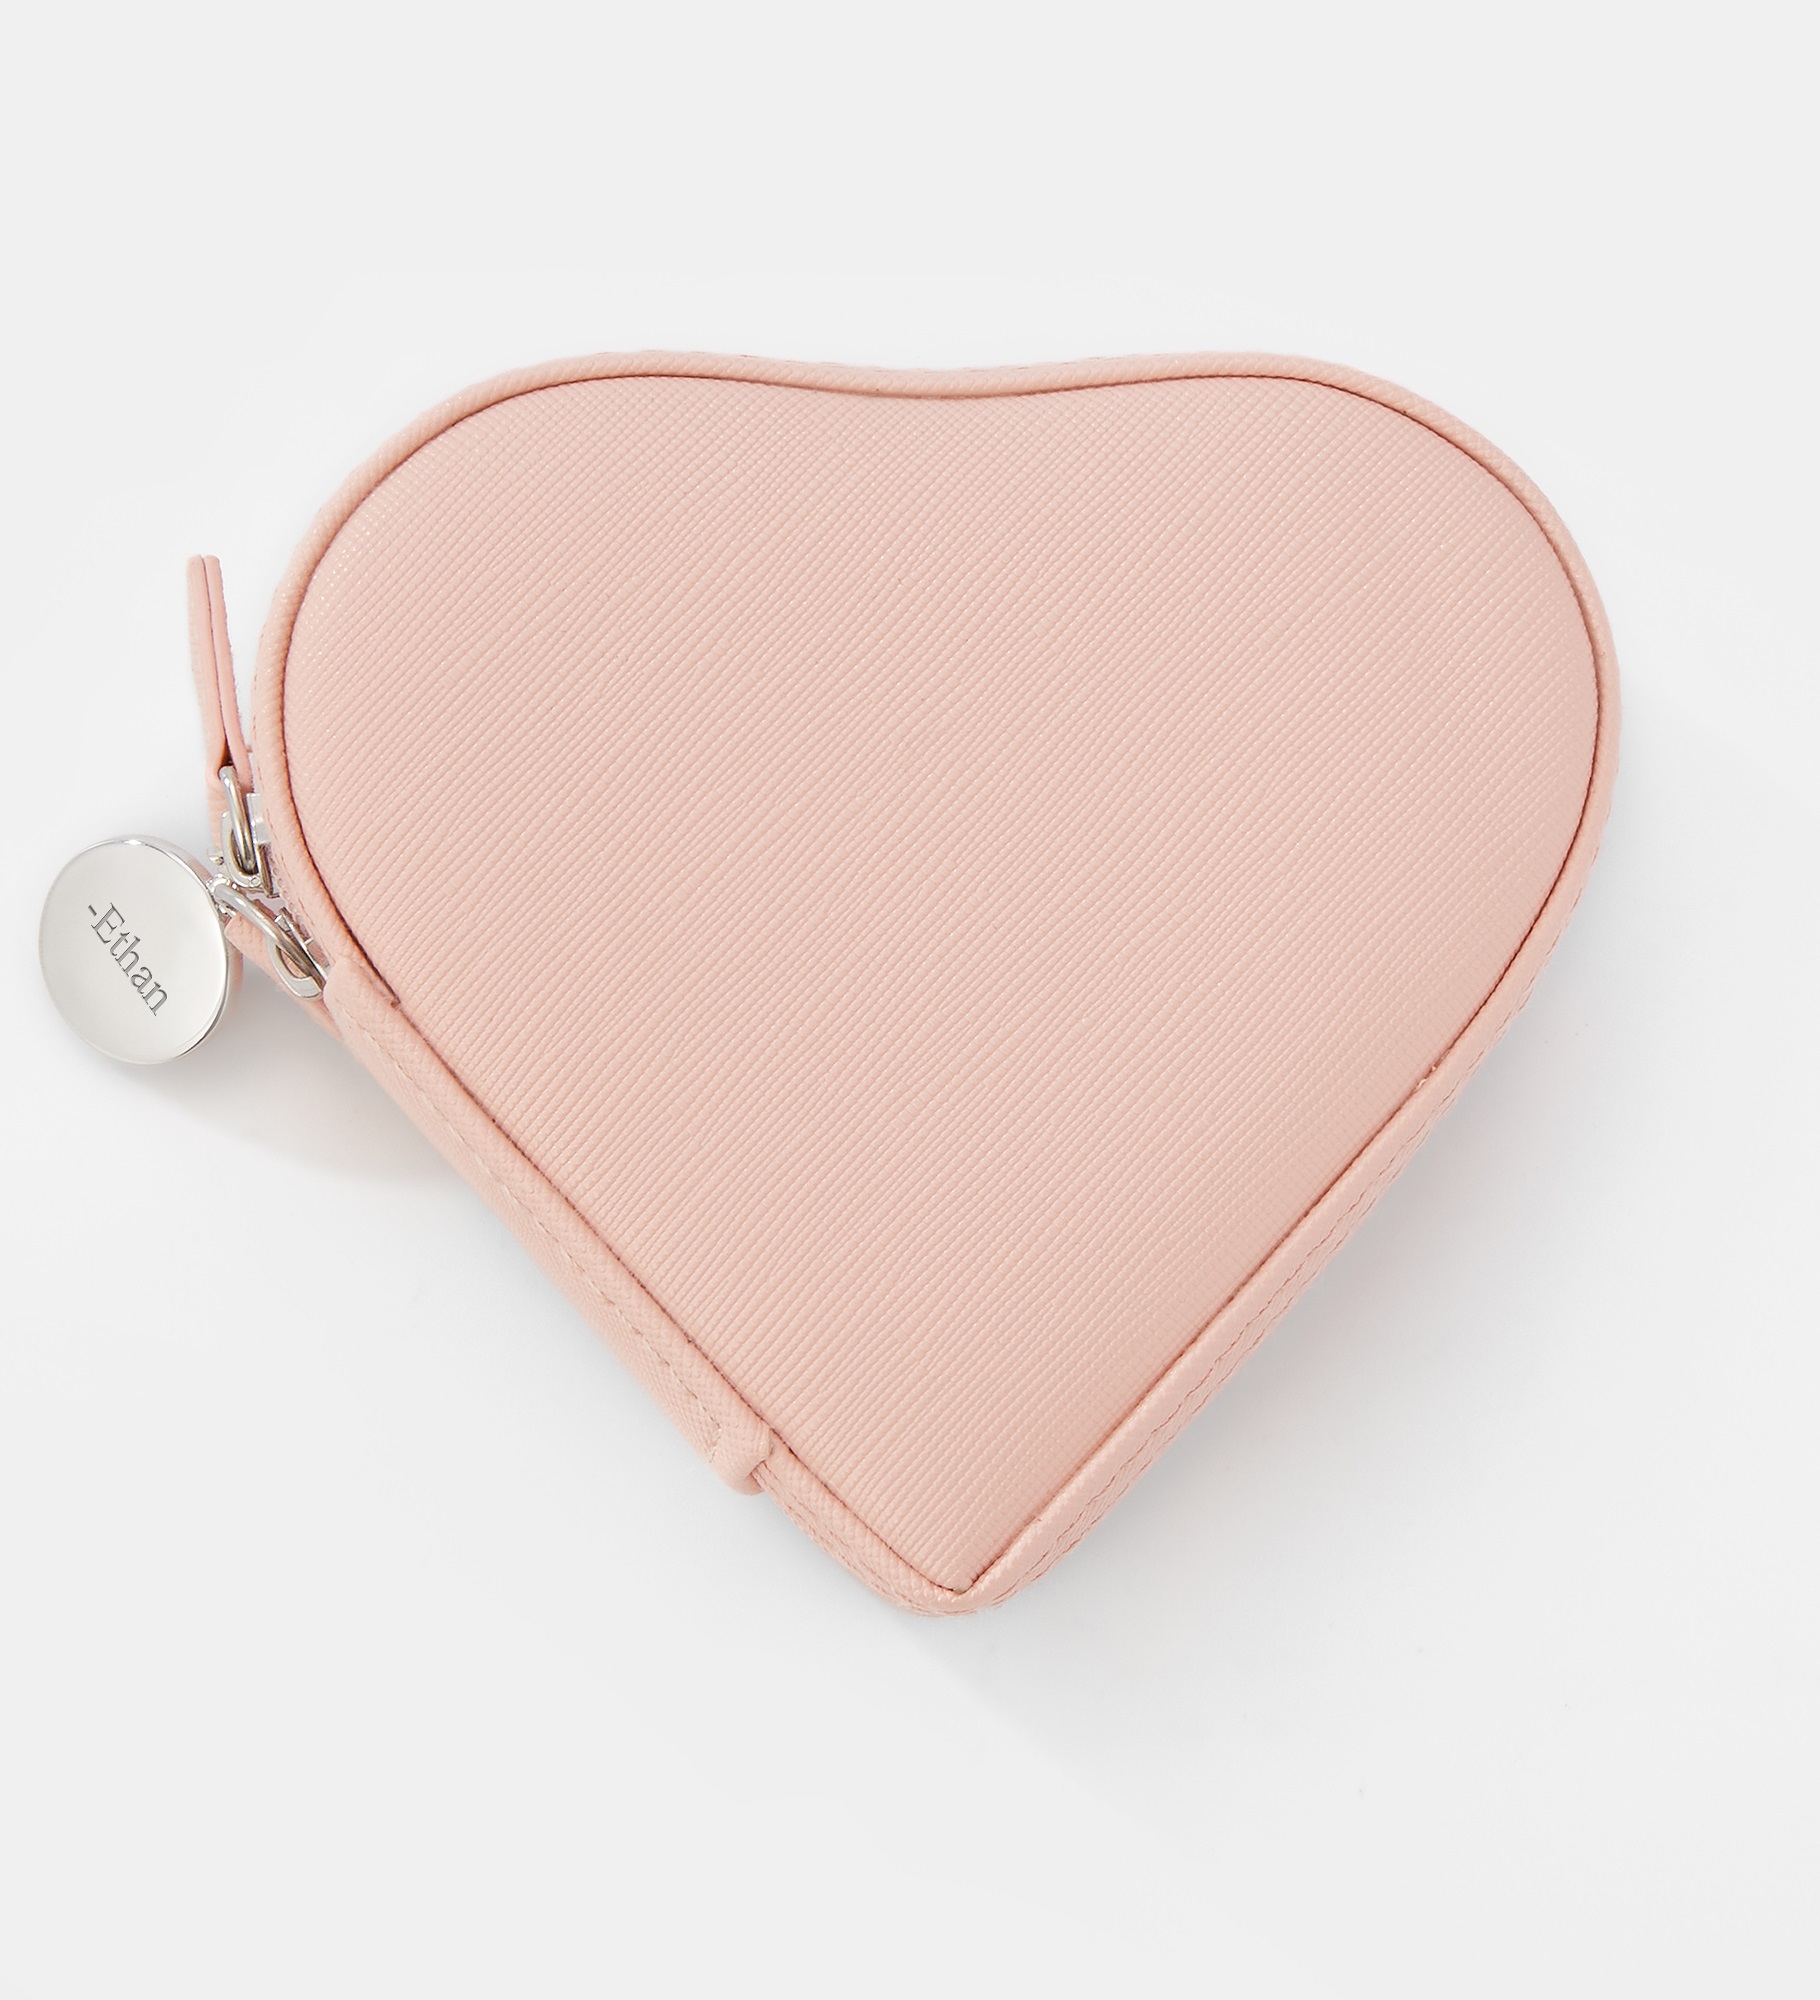  Engraved Heart Jewelry Box and Travel Case in Pink